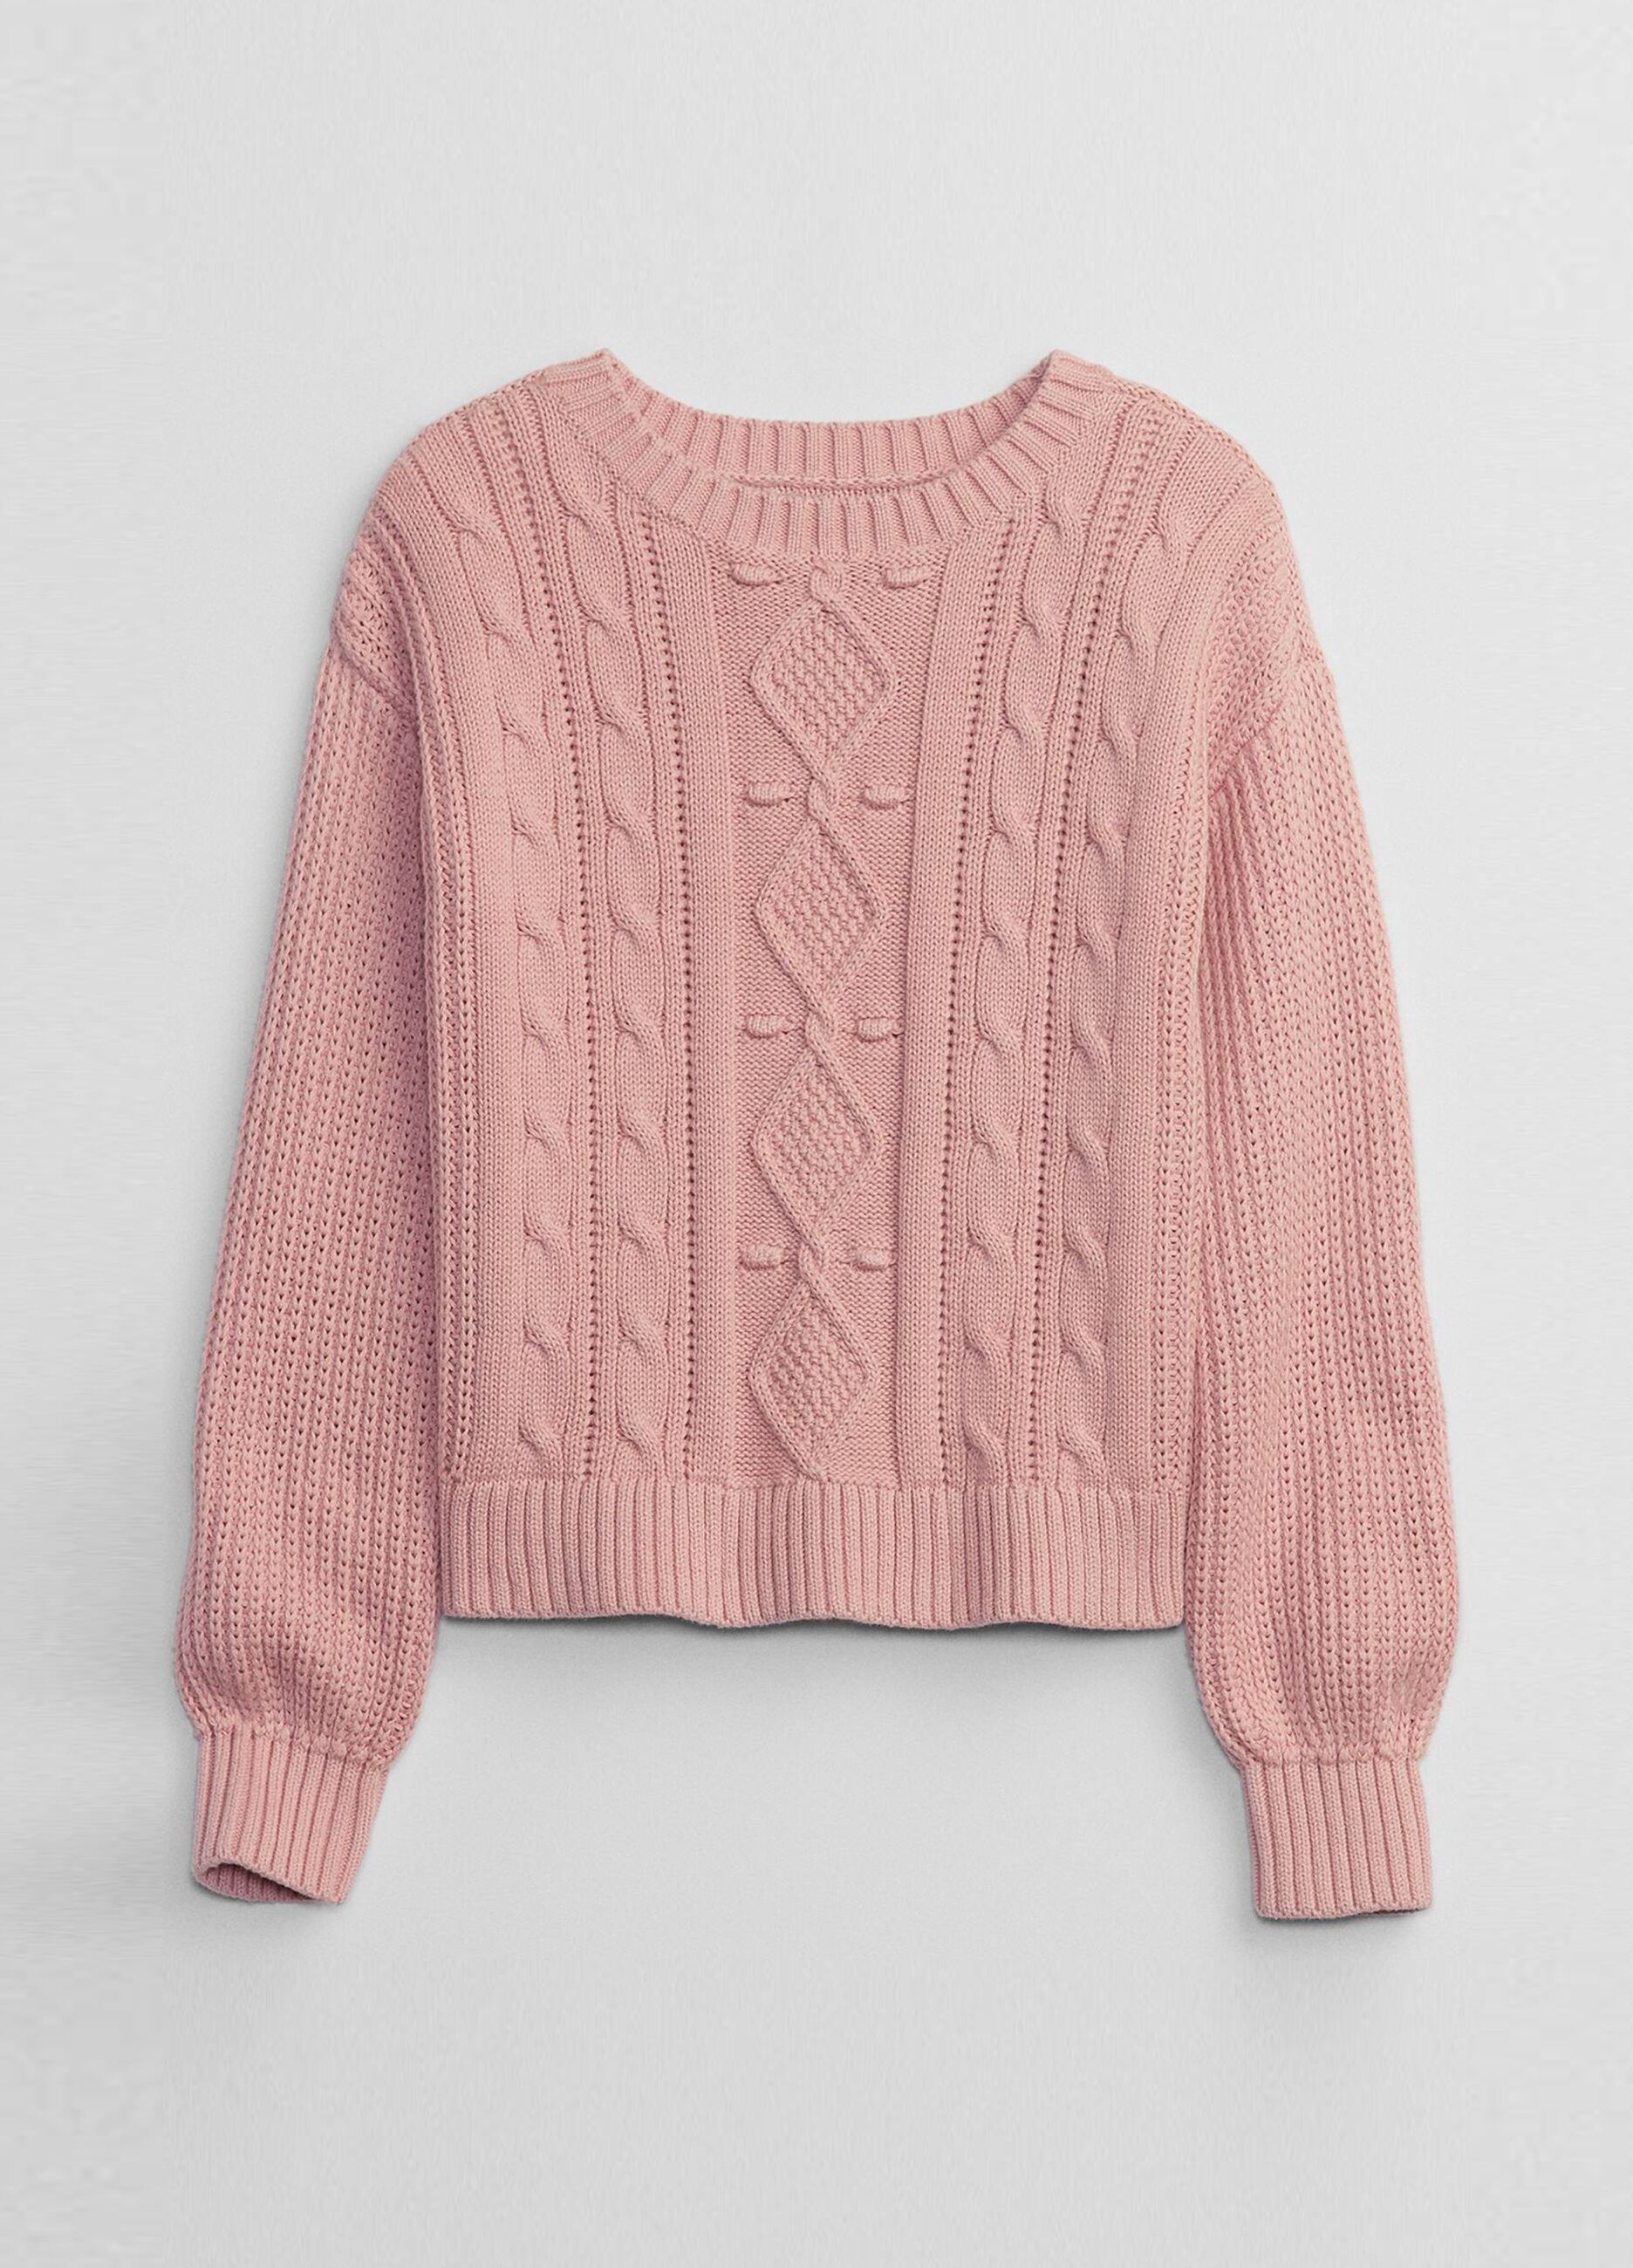 Knitted Arran pullover